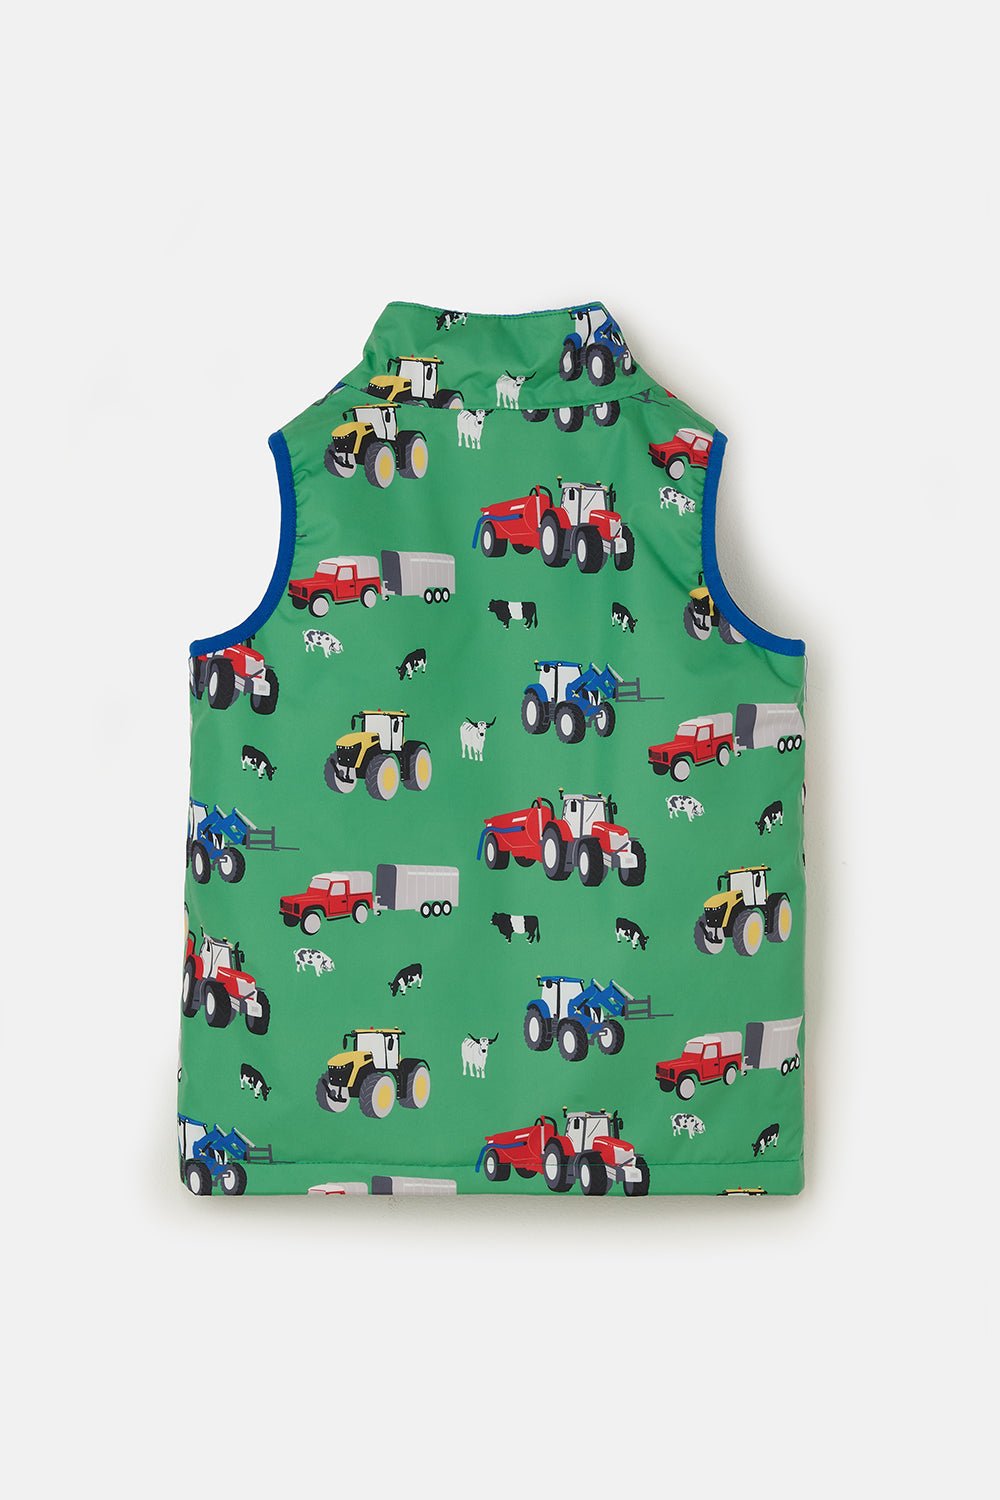 Alex Gilet - Peagreen Tractor Print-Lighthouse